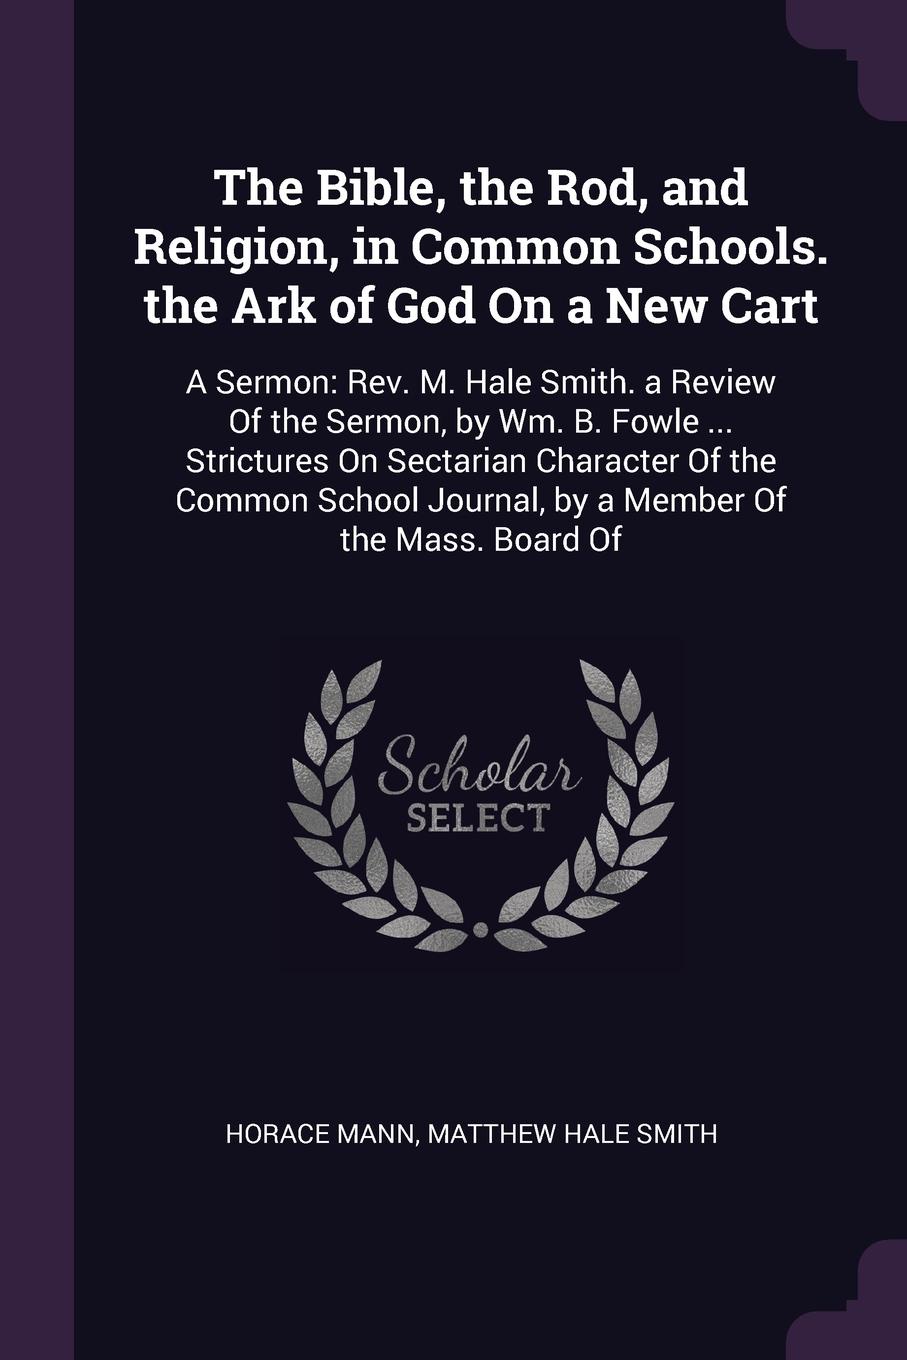 The Bible, the Rod, and Religion, in Common Schools. the Ark of God On a New Cart. A Sermon: Rev. M. Hale Smith. a Review Of the Sermon, by Wm. B. Fowle ... Strictures On Sectarian Character Of the Common School Journal, by a Member Of the Mass. B...